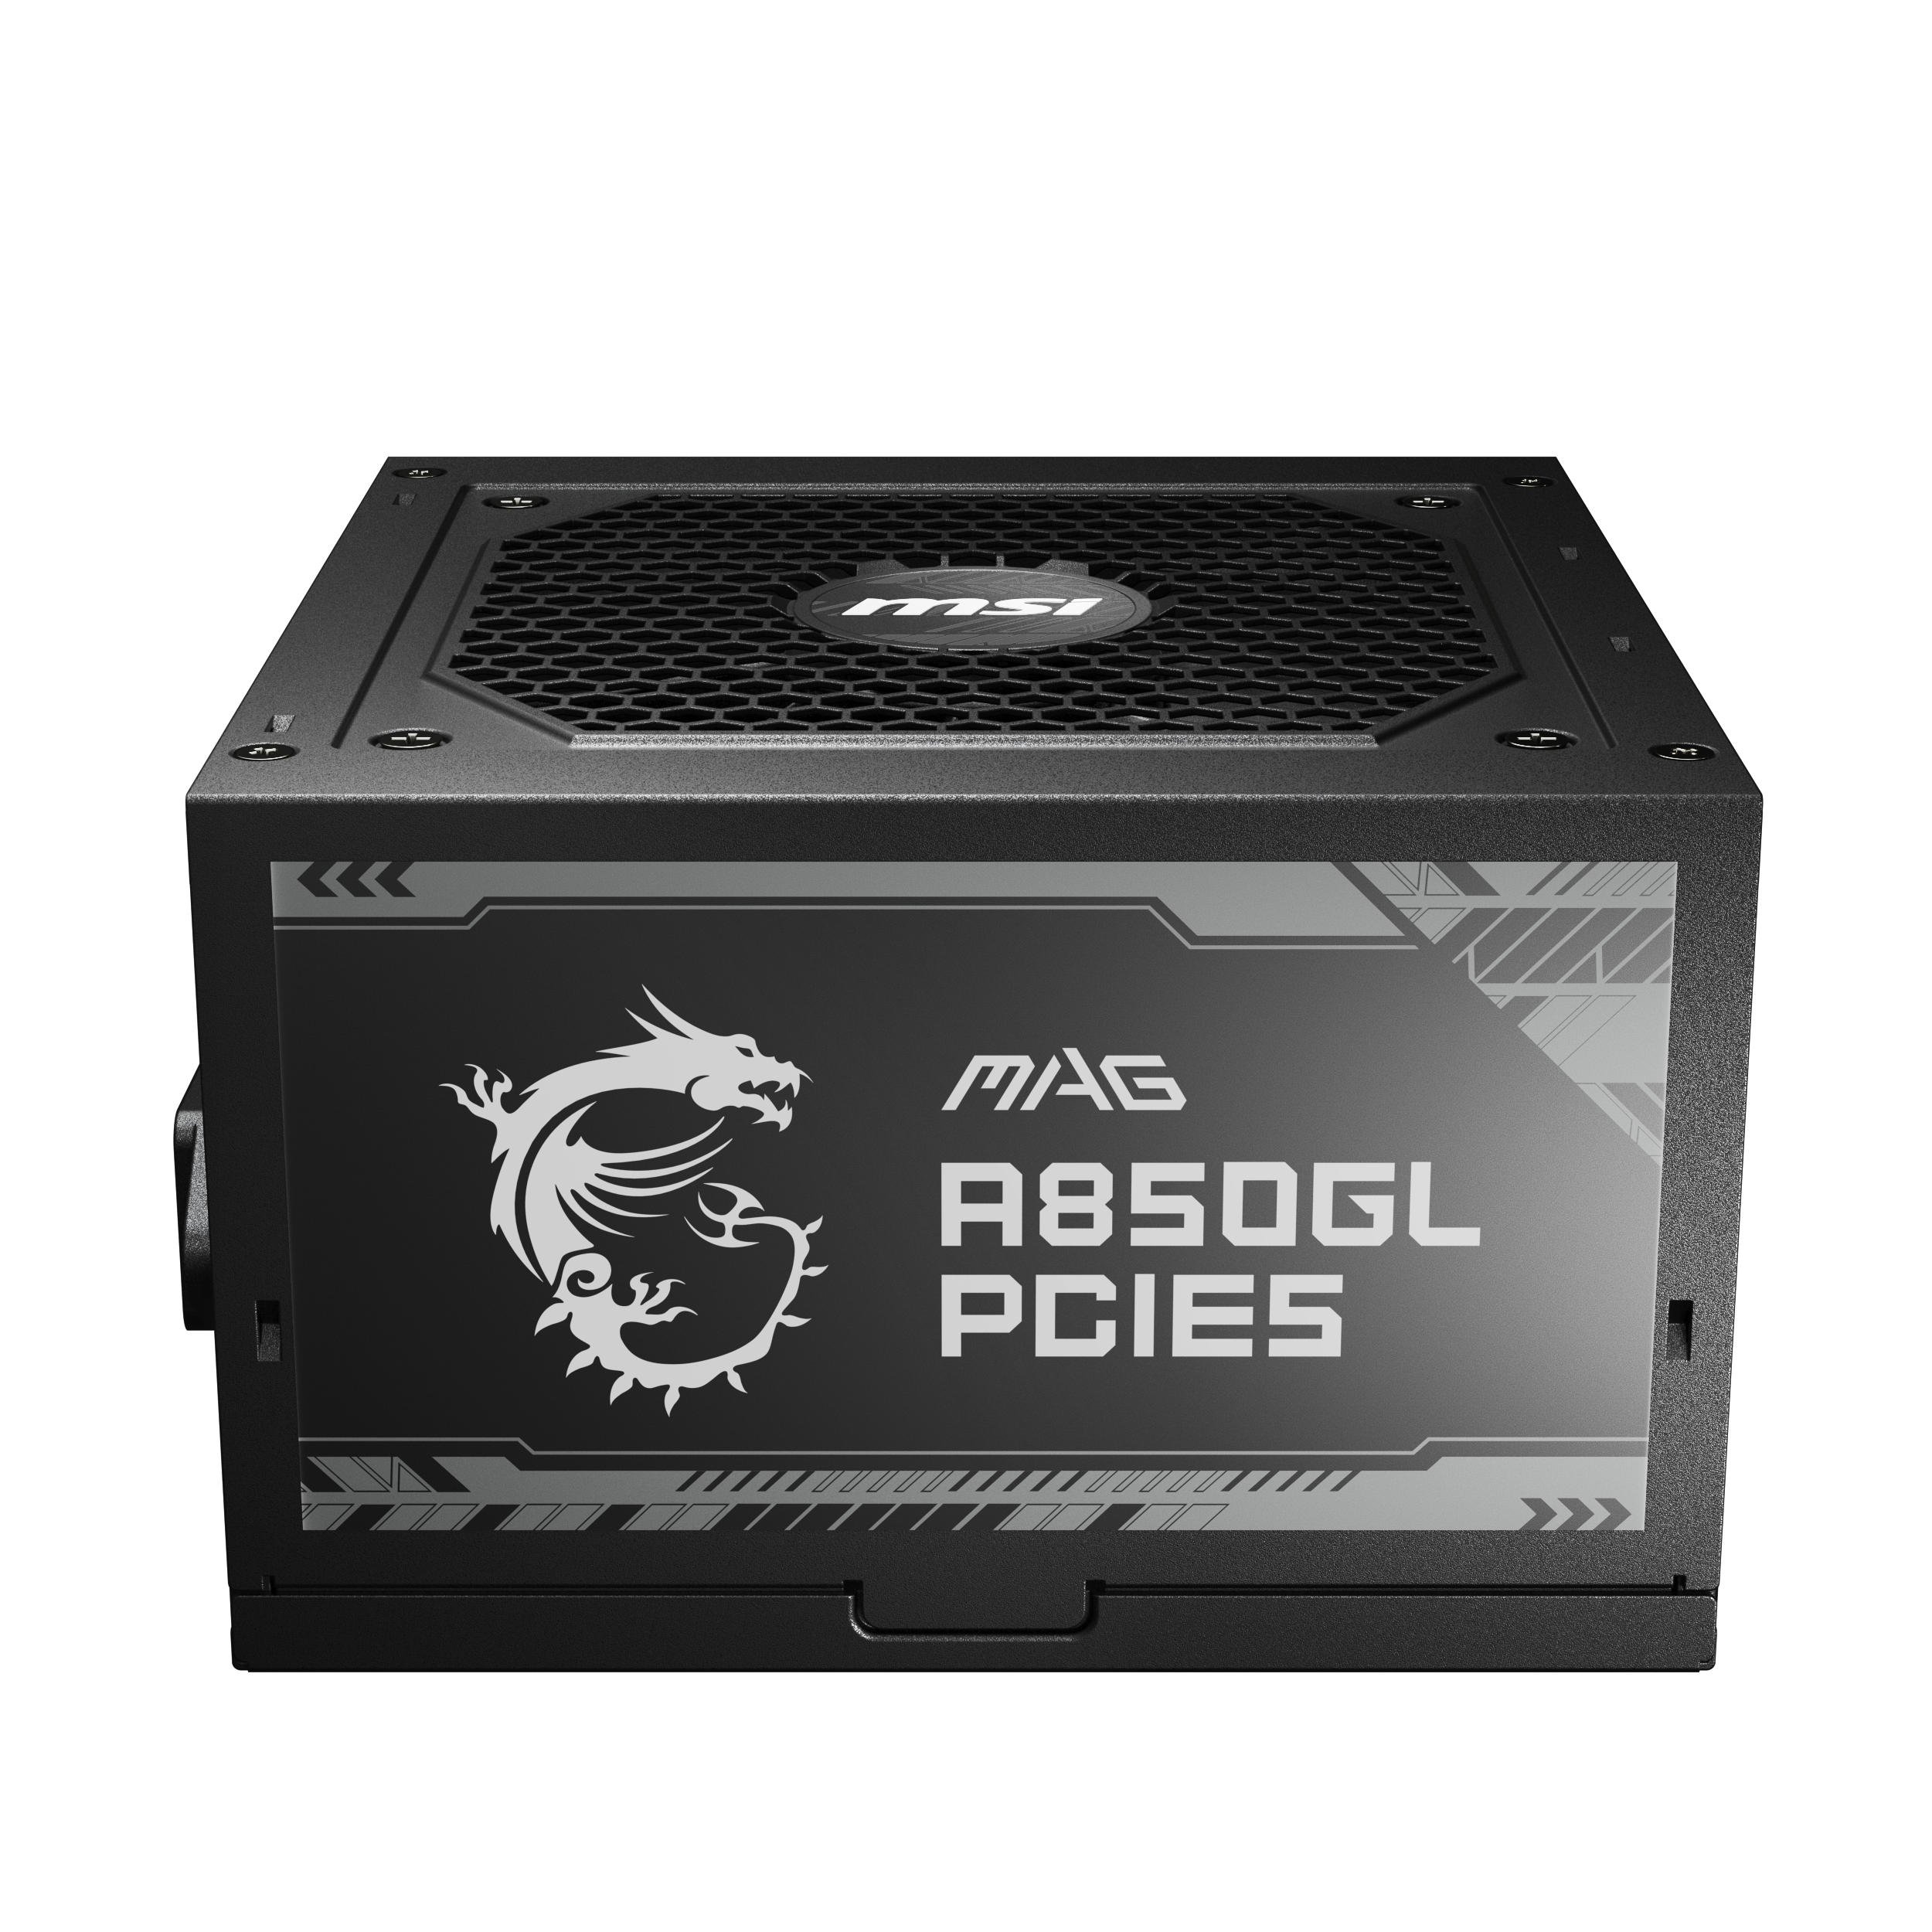 MSI MAG A850GL 850W 80 Plus Gold Rated ATX 3.0 PCIE5 Fully Modular